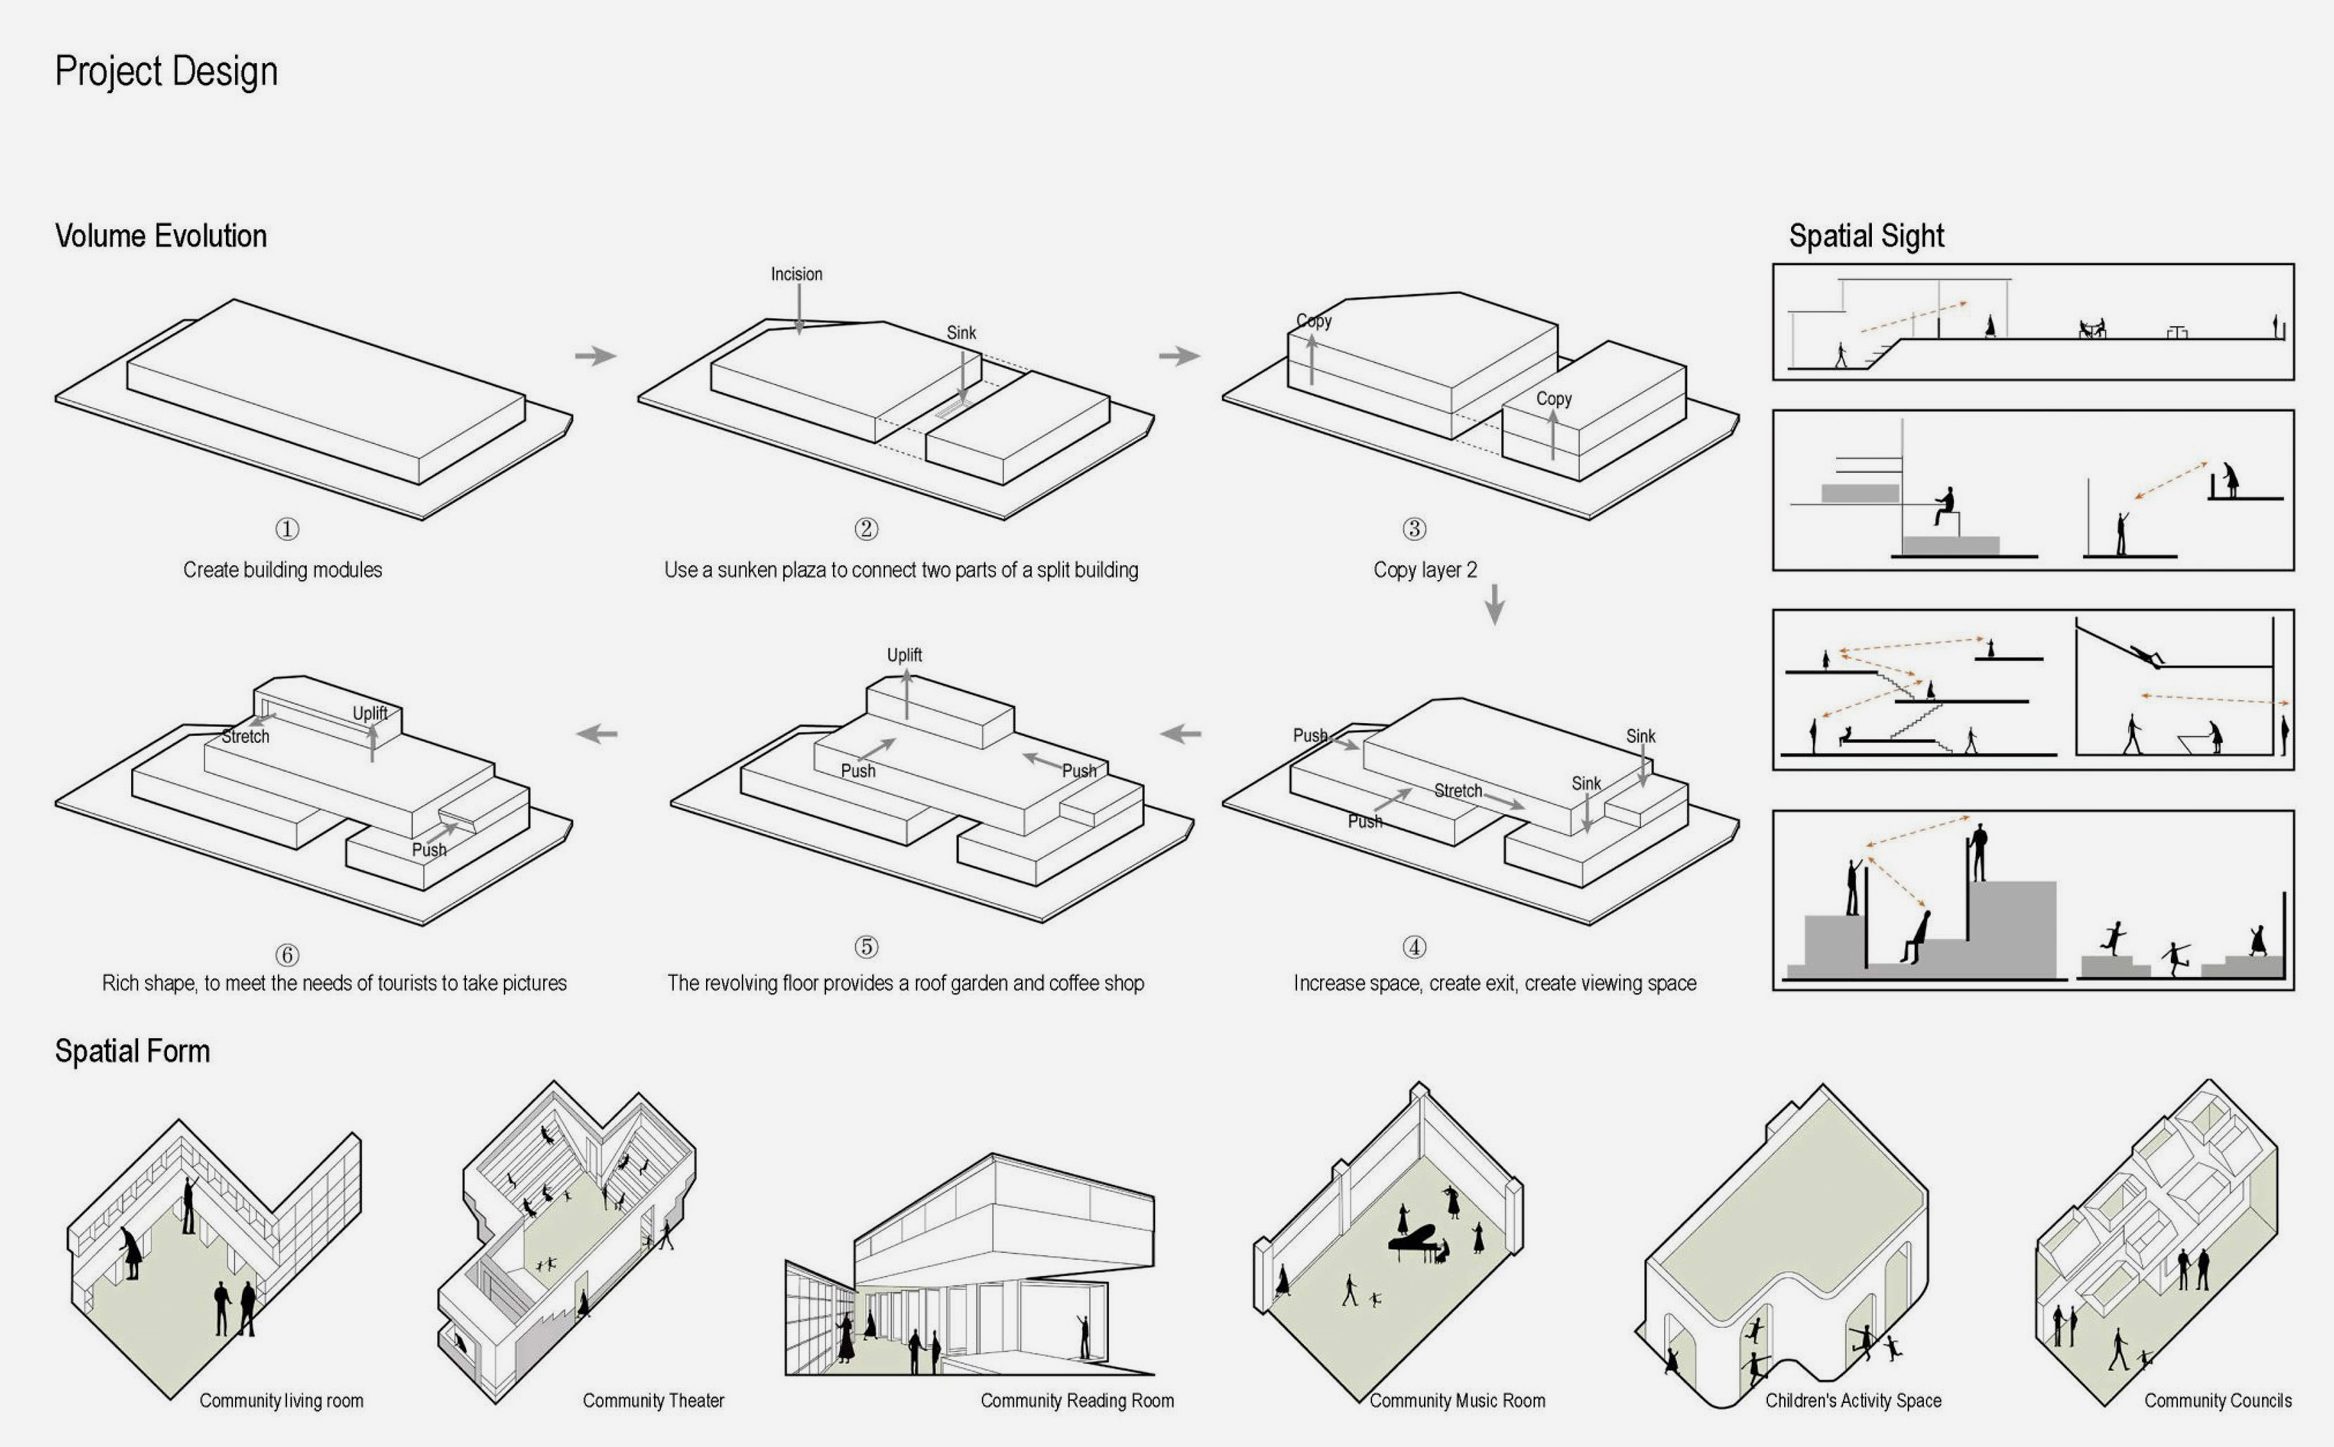 Image showing a series of architectural drawings including sections and axonometric views